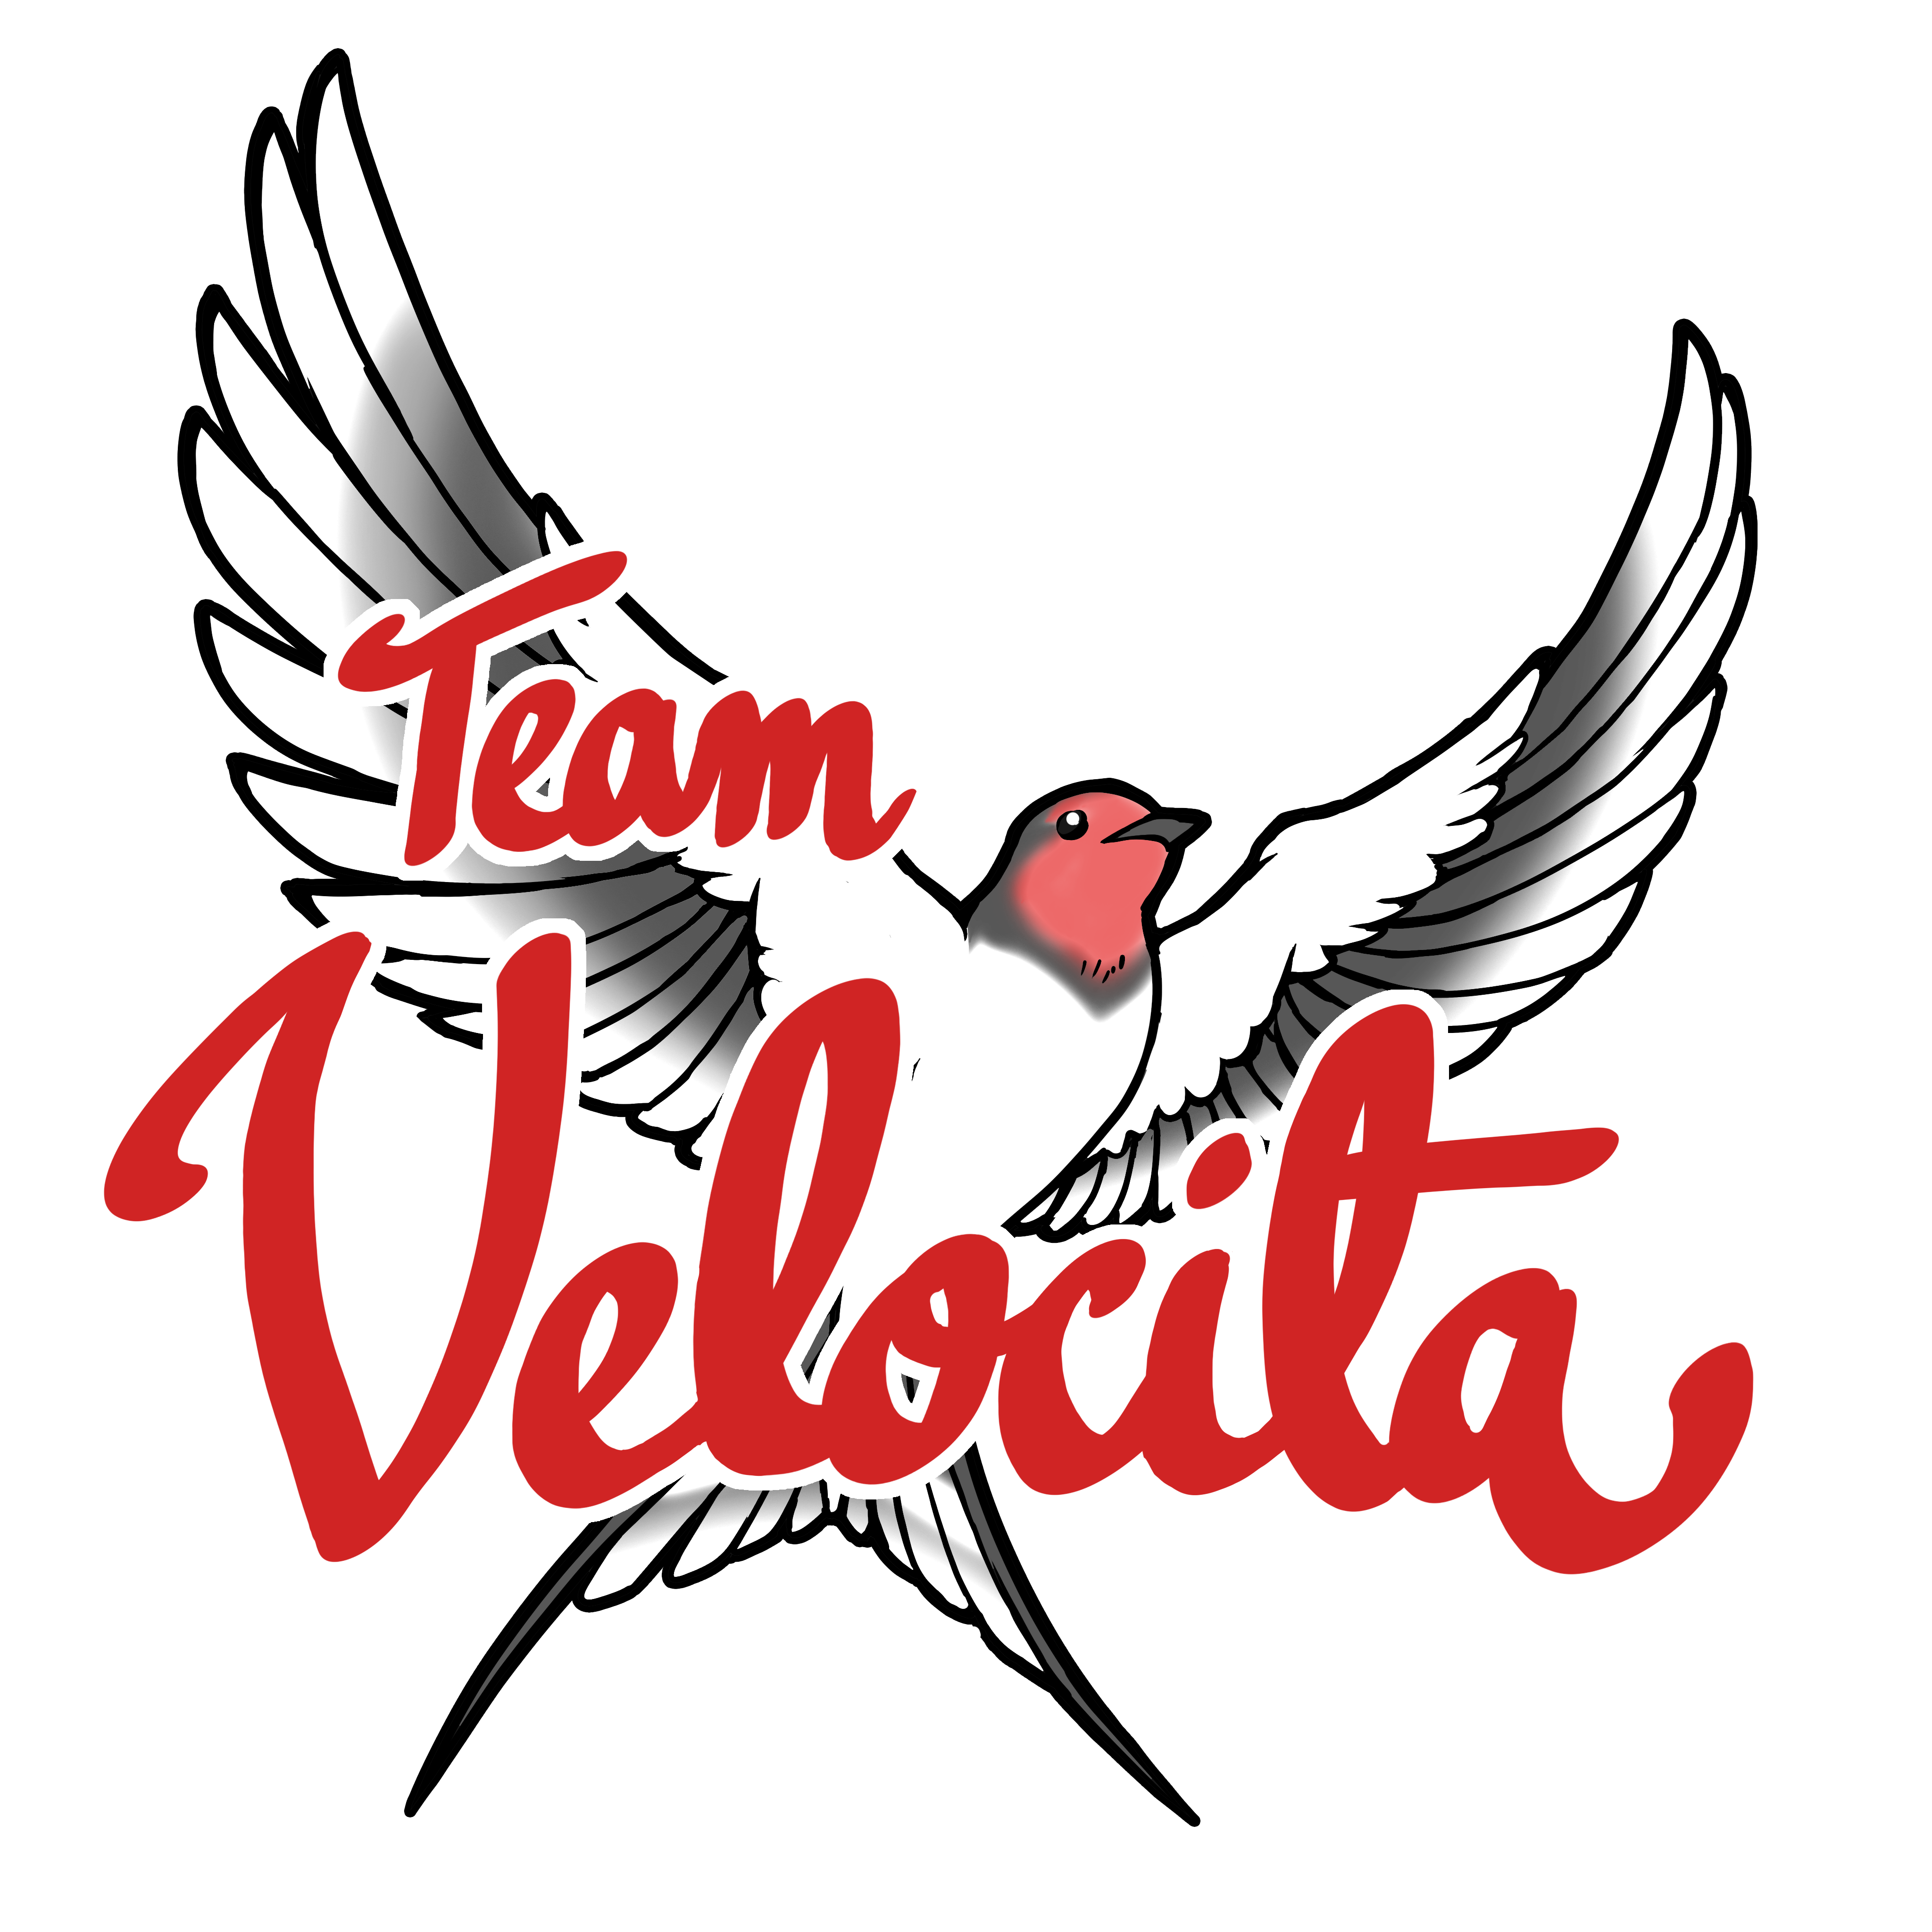 Team Velocita Logo, a swallow bird with its wings spread out